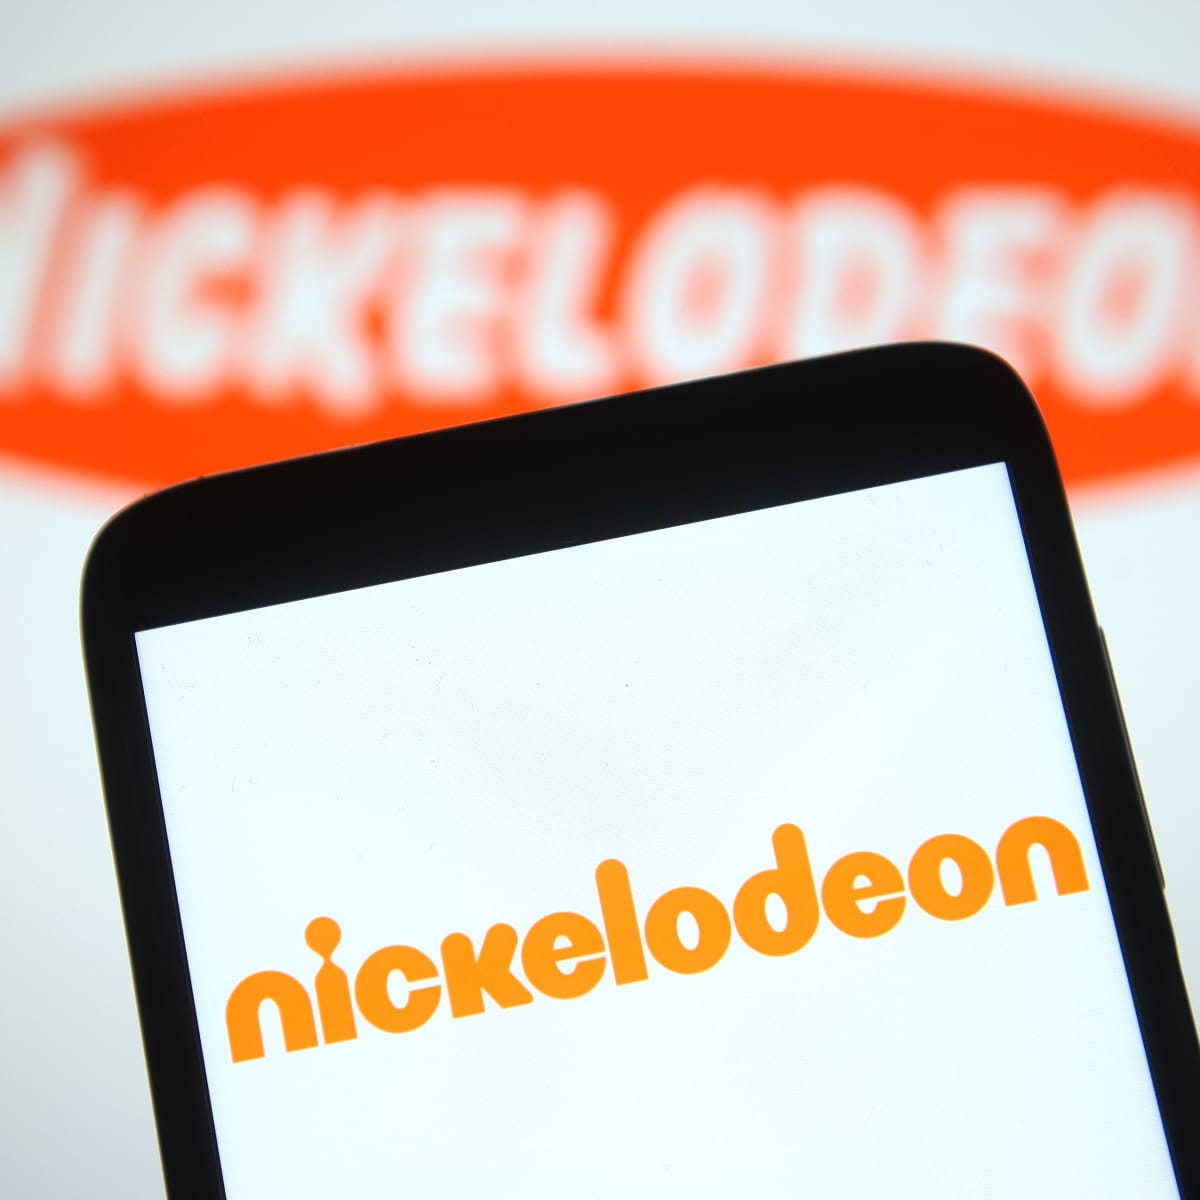 BREAKING: Nickelodeon Announces Return To NFL For Special Holiday Game With  A Ton Of Cool Features